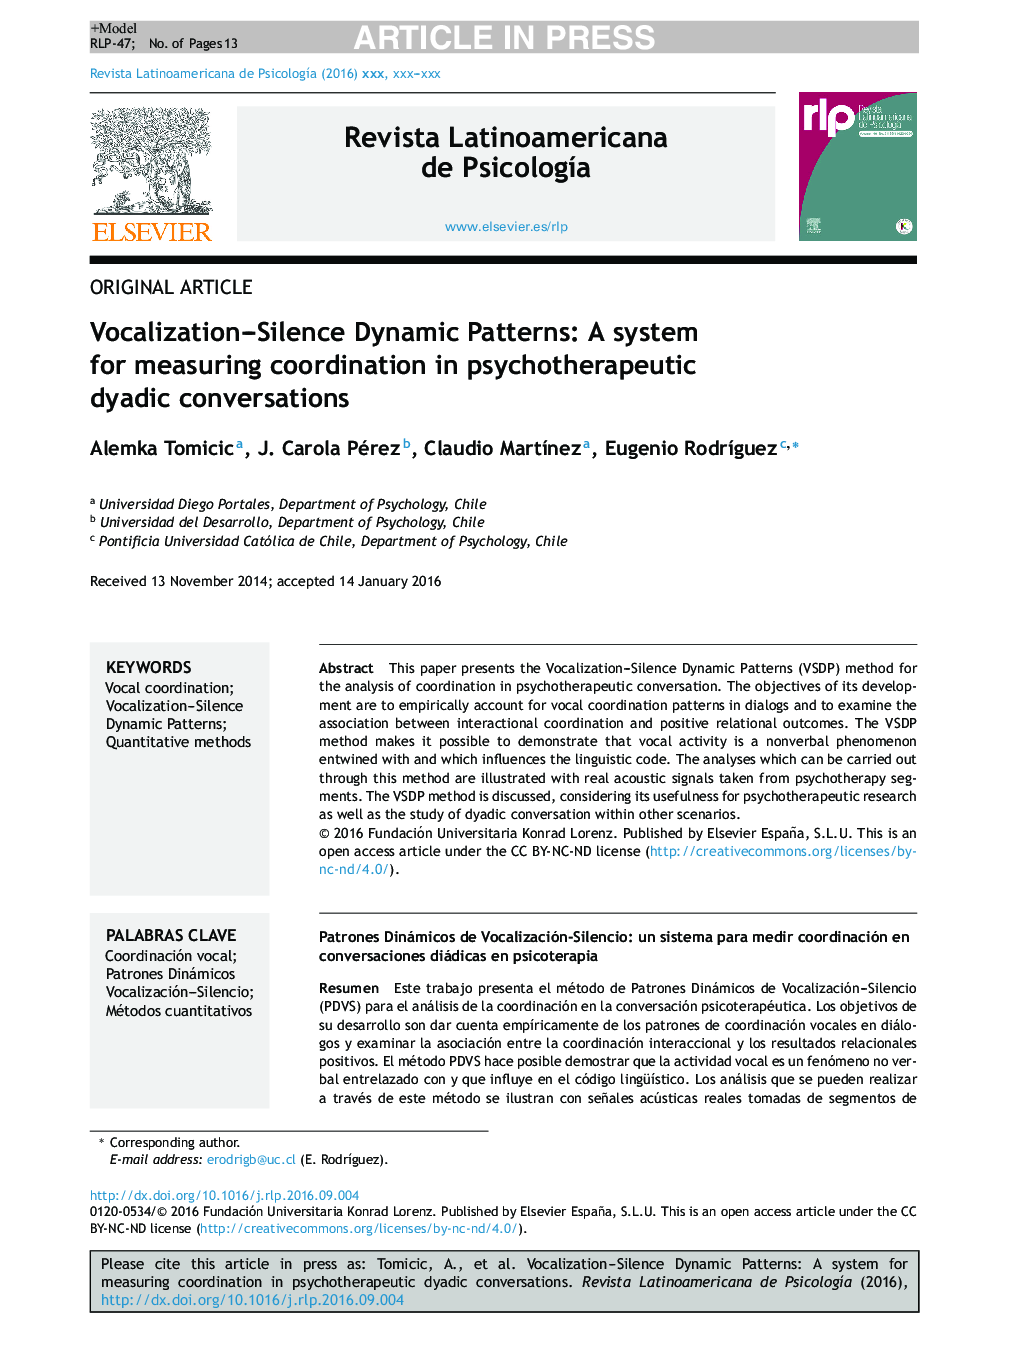 Vocalization-Silence Dynamic Patterns: A system for measuring coordination in psychotherapeutic dyadic conversations